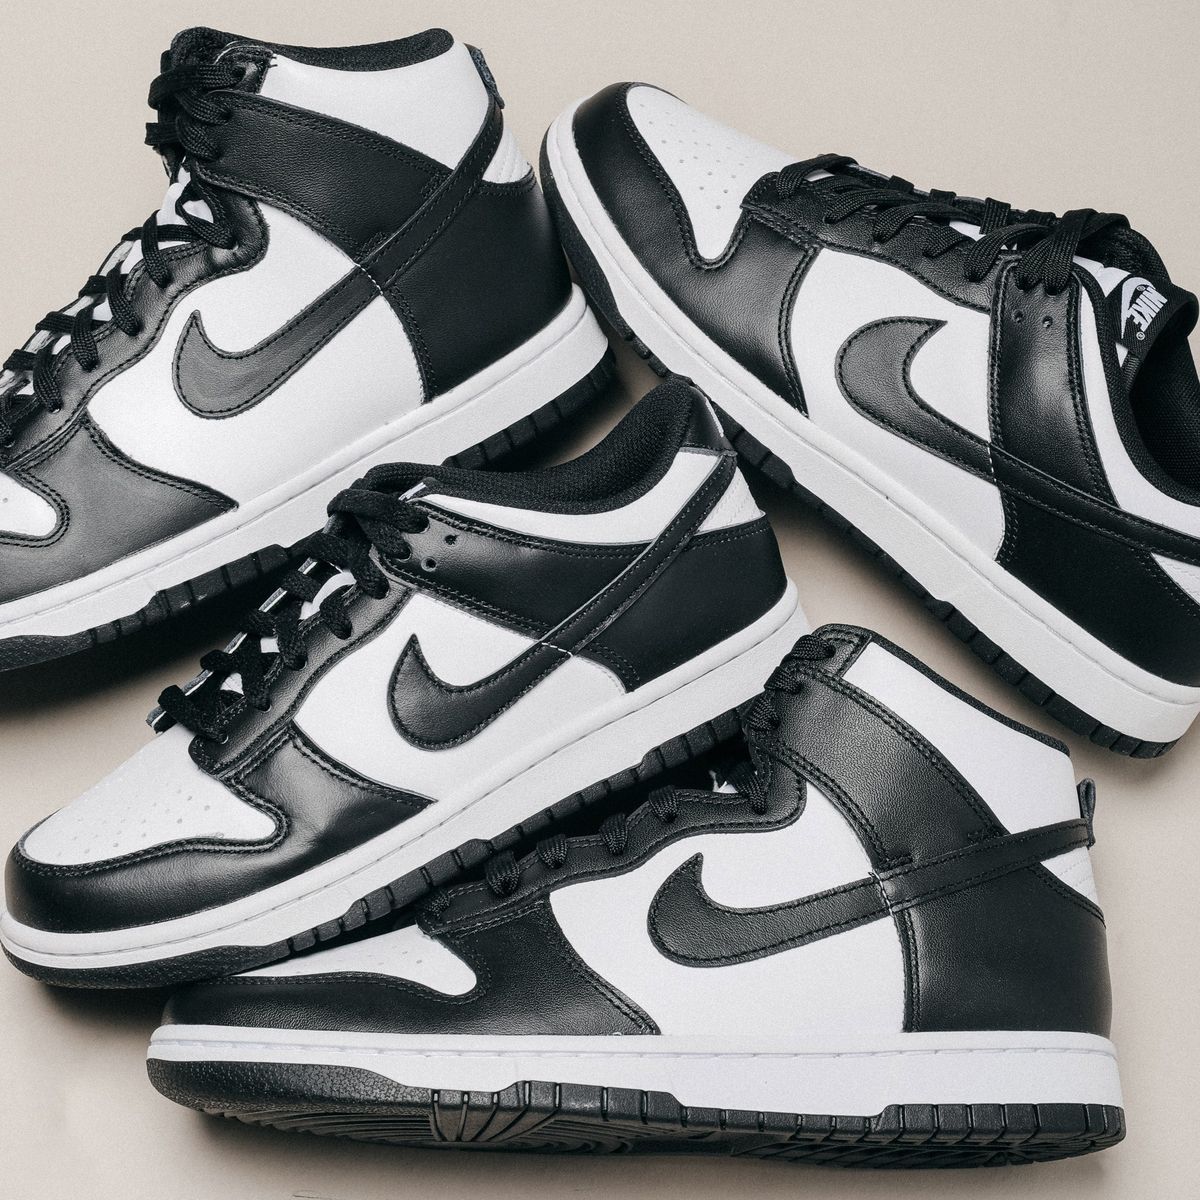 How Panda Dunks Became One the Popular Sneakers